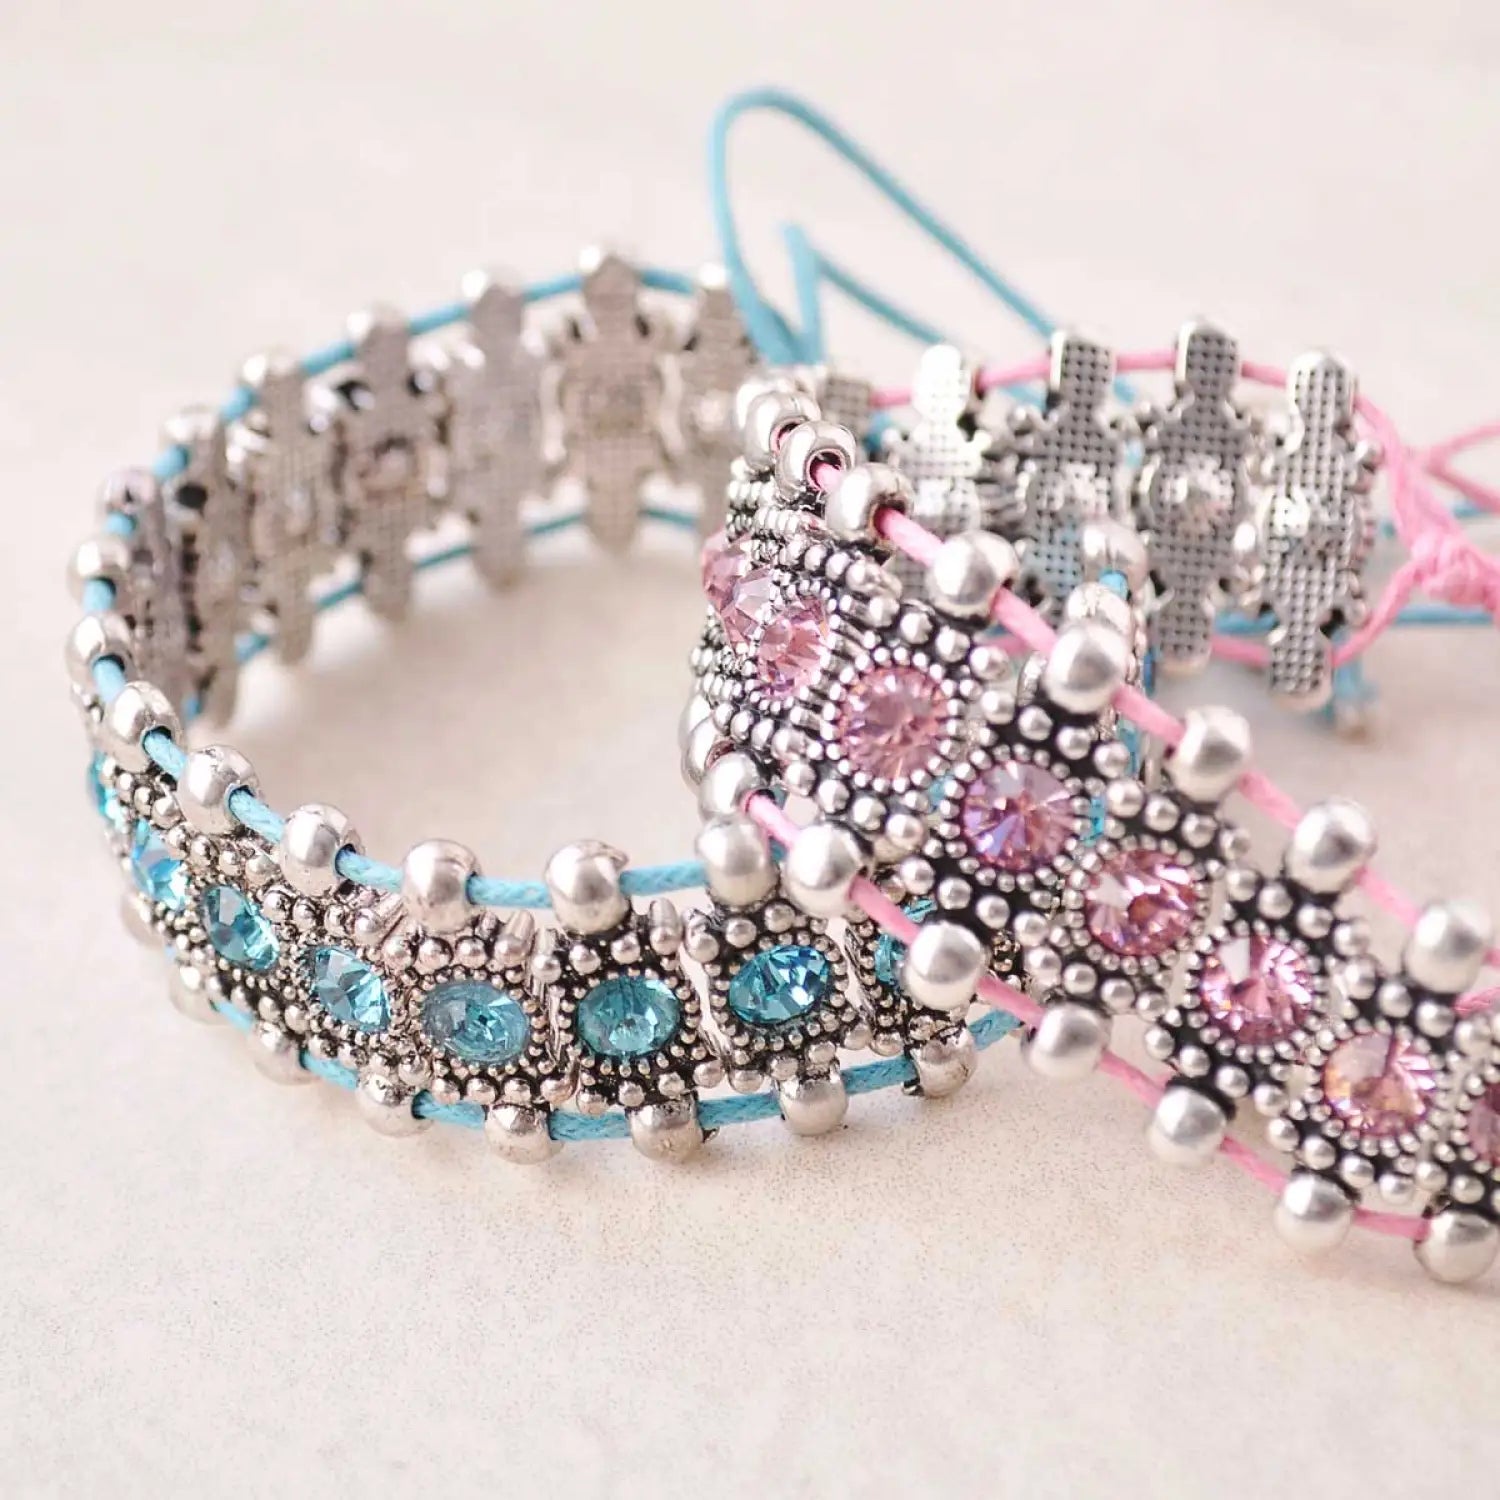 Boho rhinestone and elastic bead bracelets with silver, pink, and blue beads.